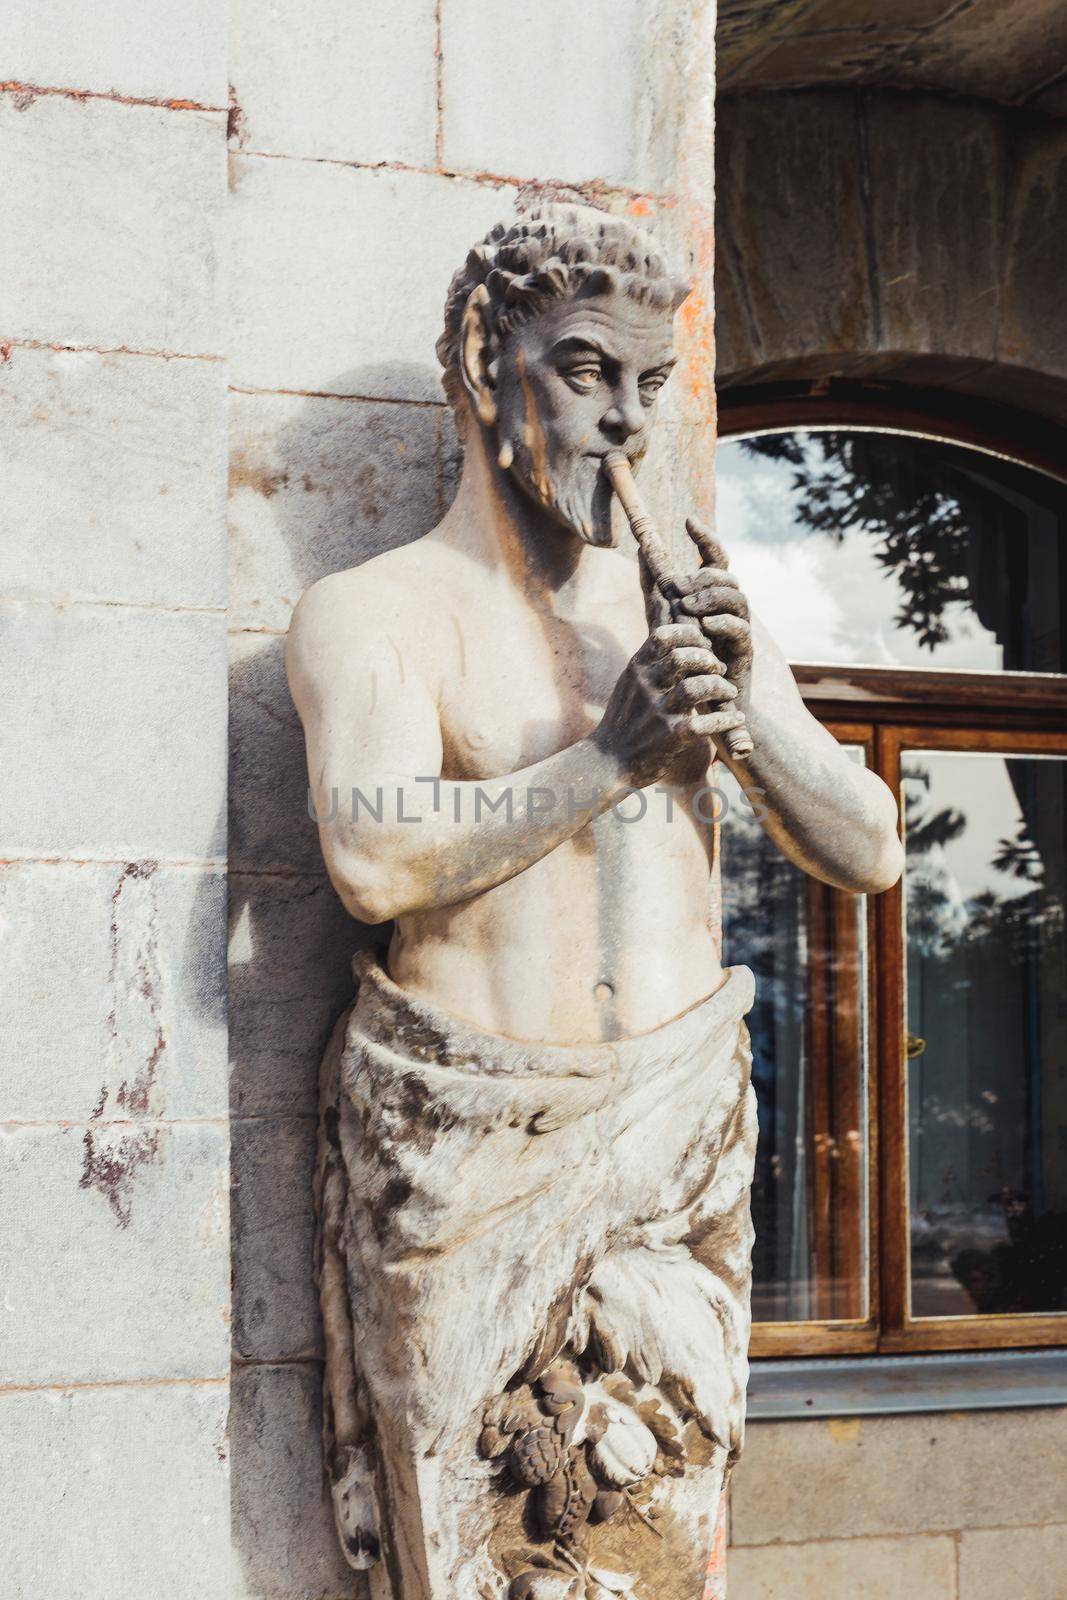 ALUPKA, CRIMEA - February 10, 2015. Statue of Satyr playing the pipe in front of Massandra Palace. Chateauesque villa of Emperor Alexander III of Russia.